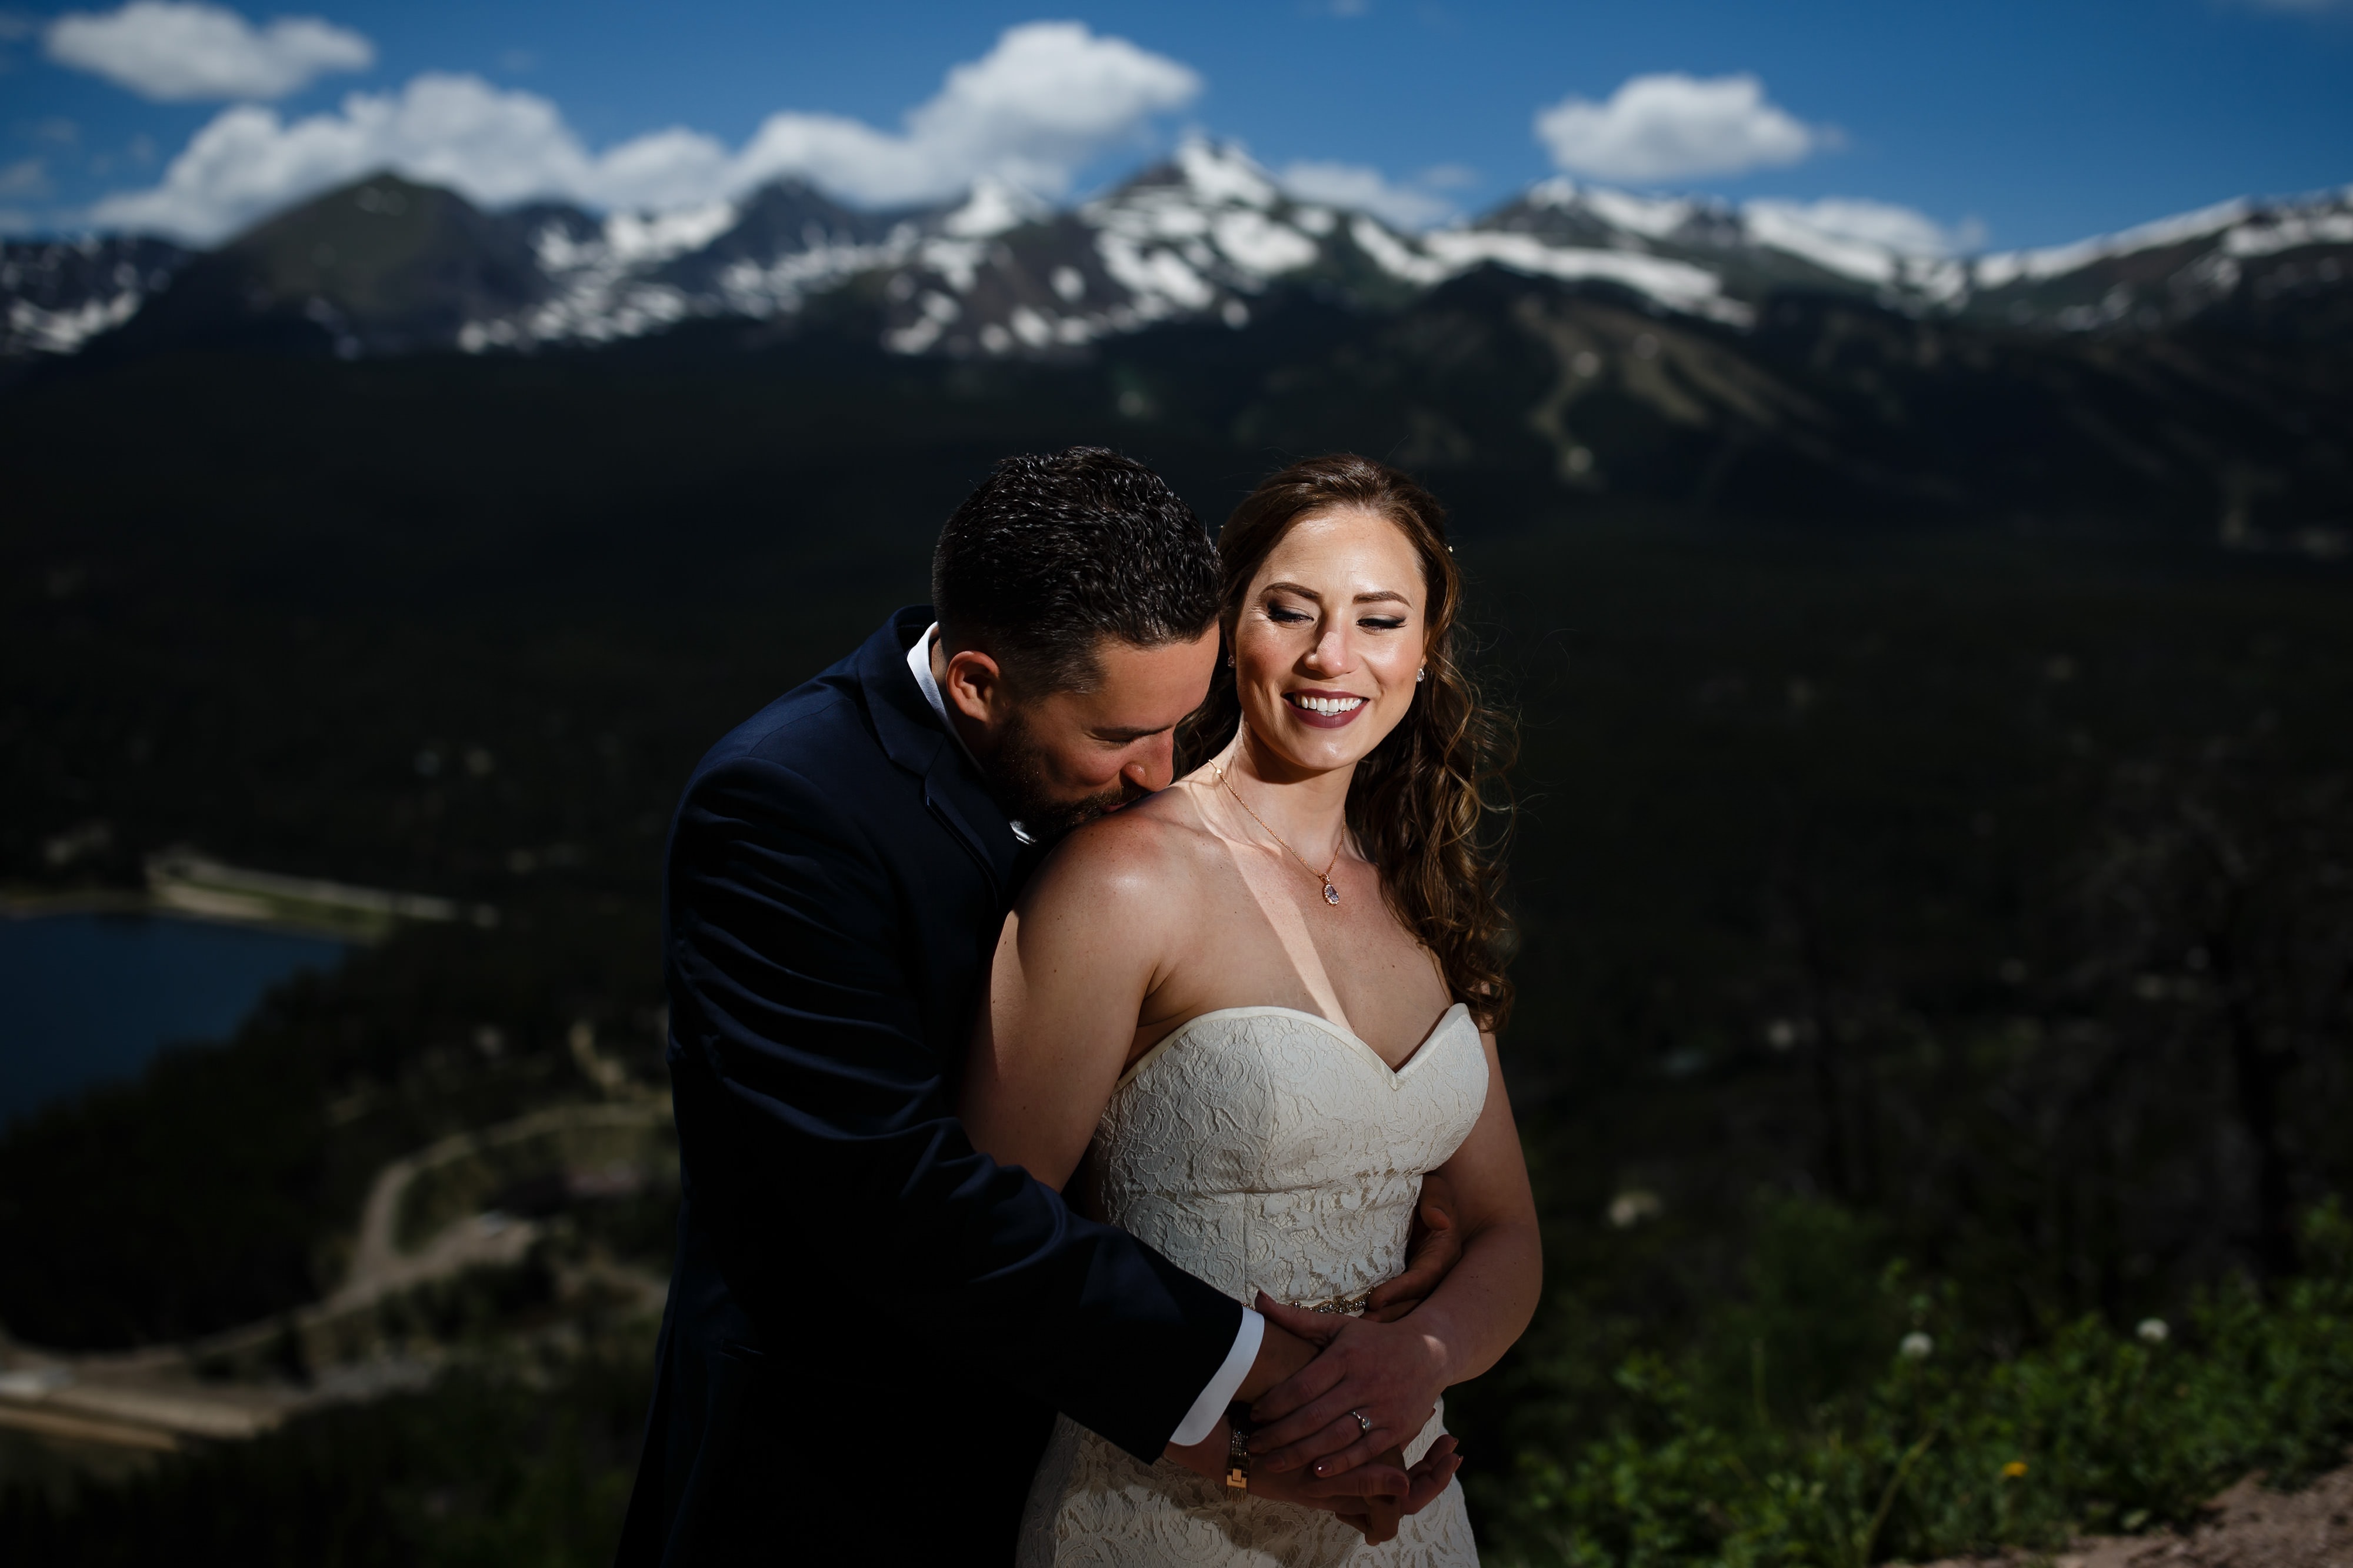 Sharon and Nick pose on Boreas Pass Road before their wedding